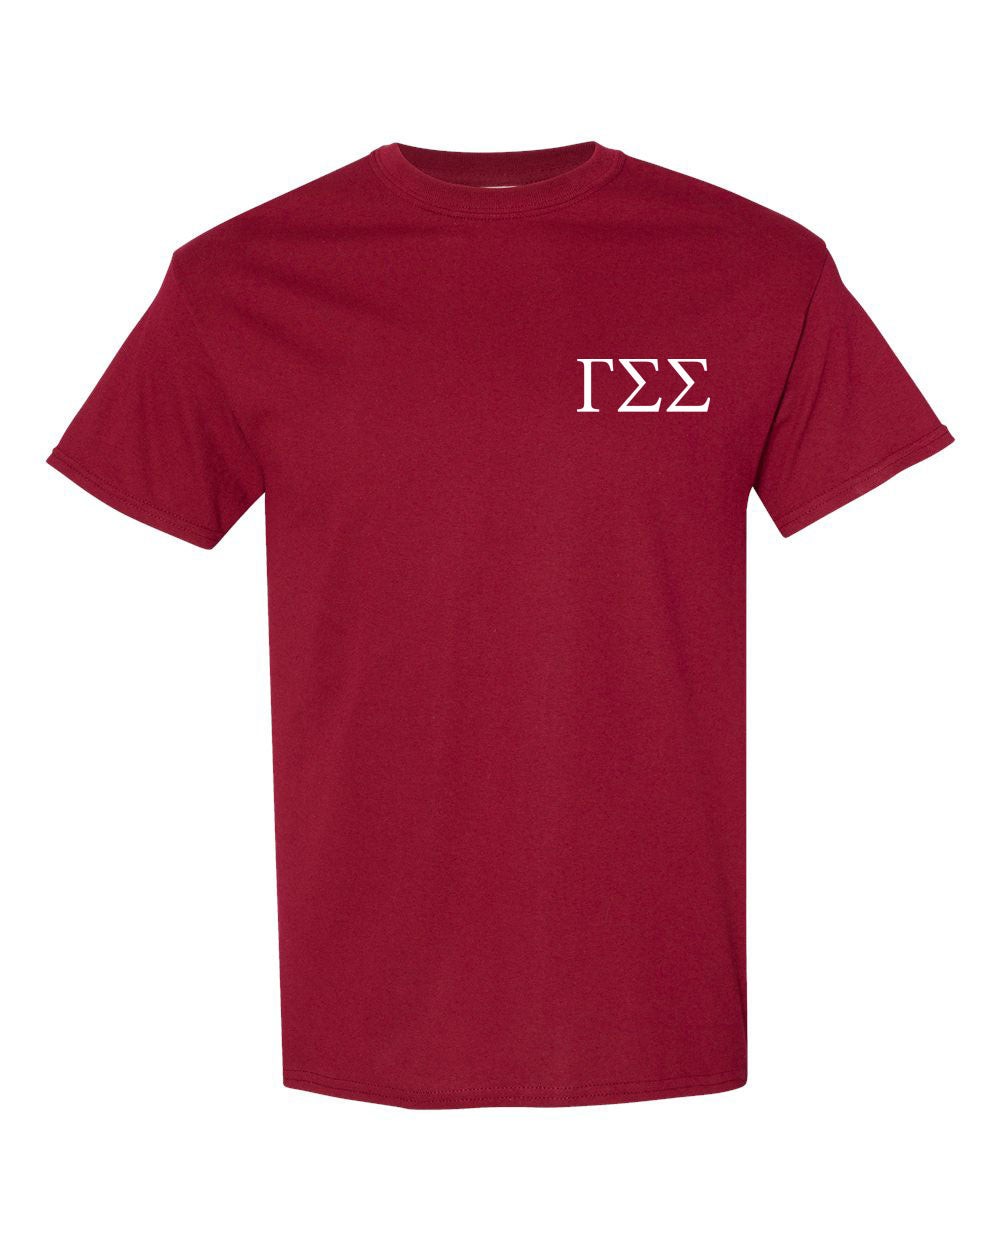 a red t - shirt with white letters on it